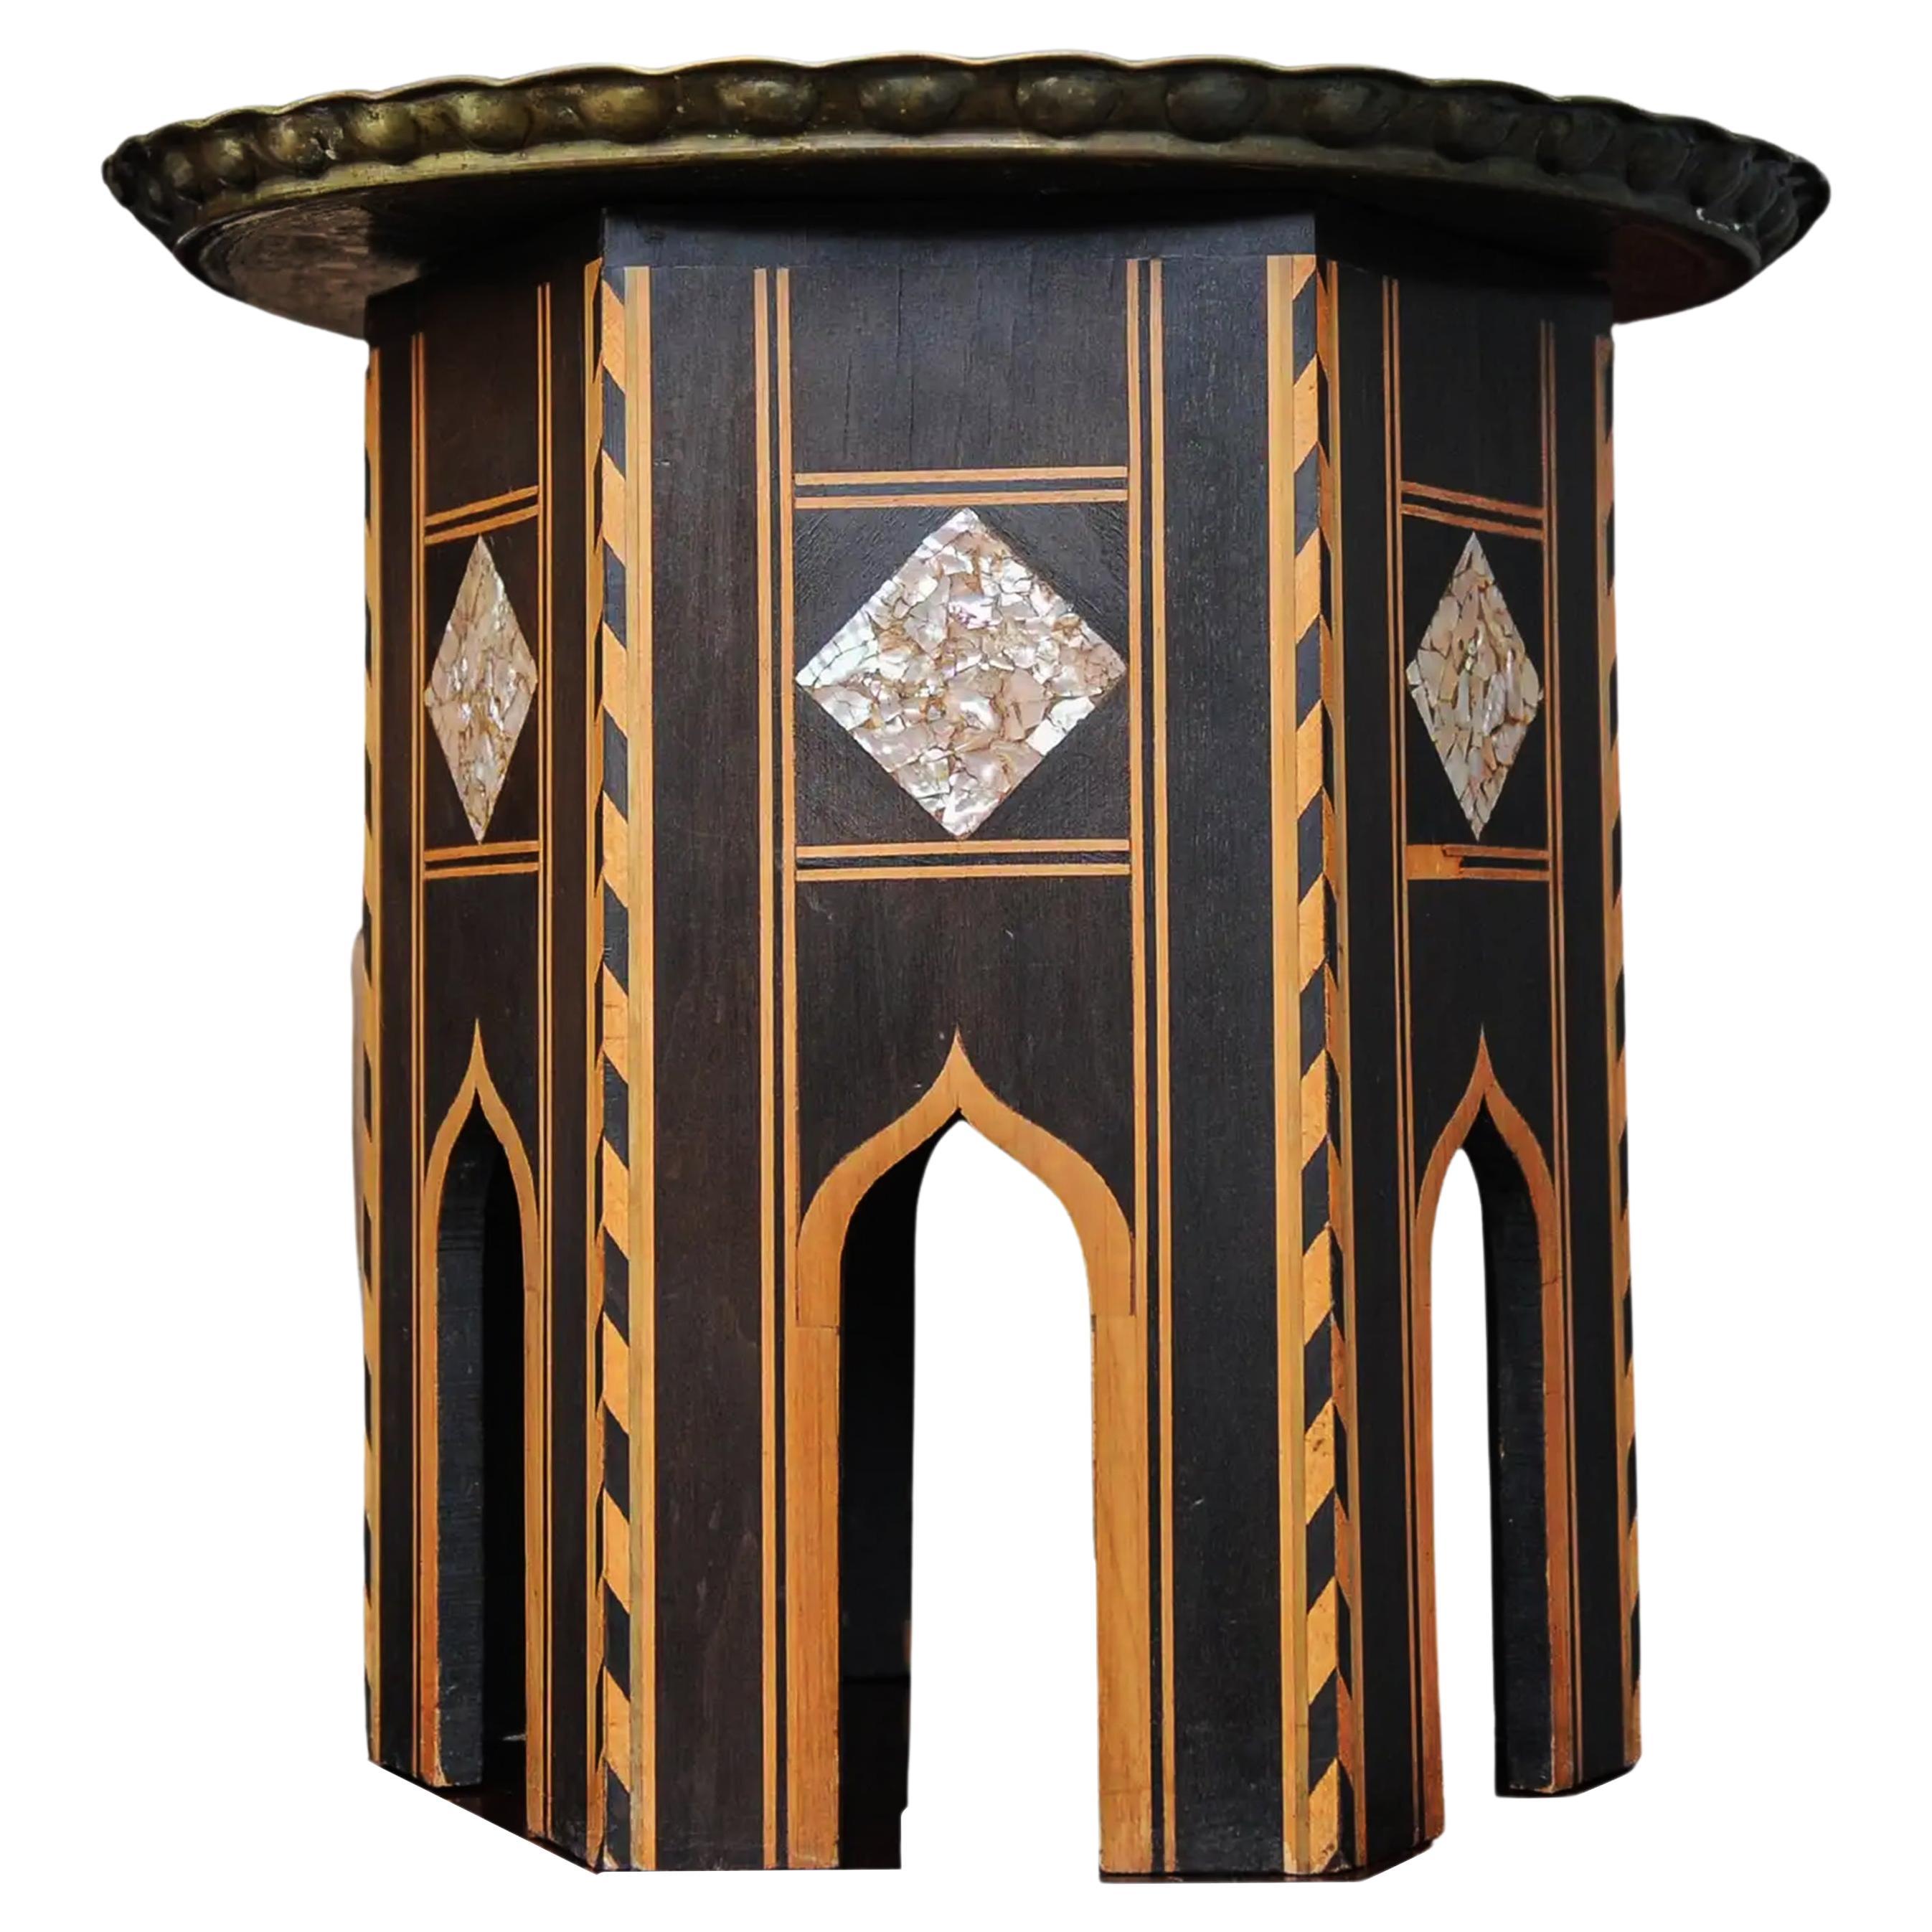 A Syrian Ebonised Tea Table With Removable Brass Decorative Pie Crust Edged Tray Top

Full Height 51cm
Base Width 41cm
Brass Tray Diameter 58cm